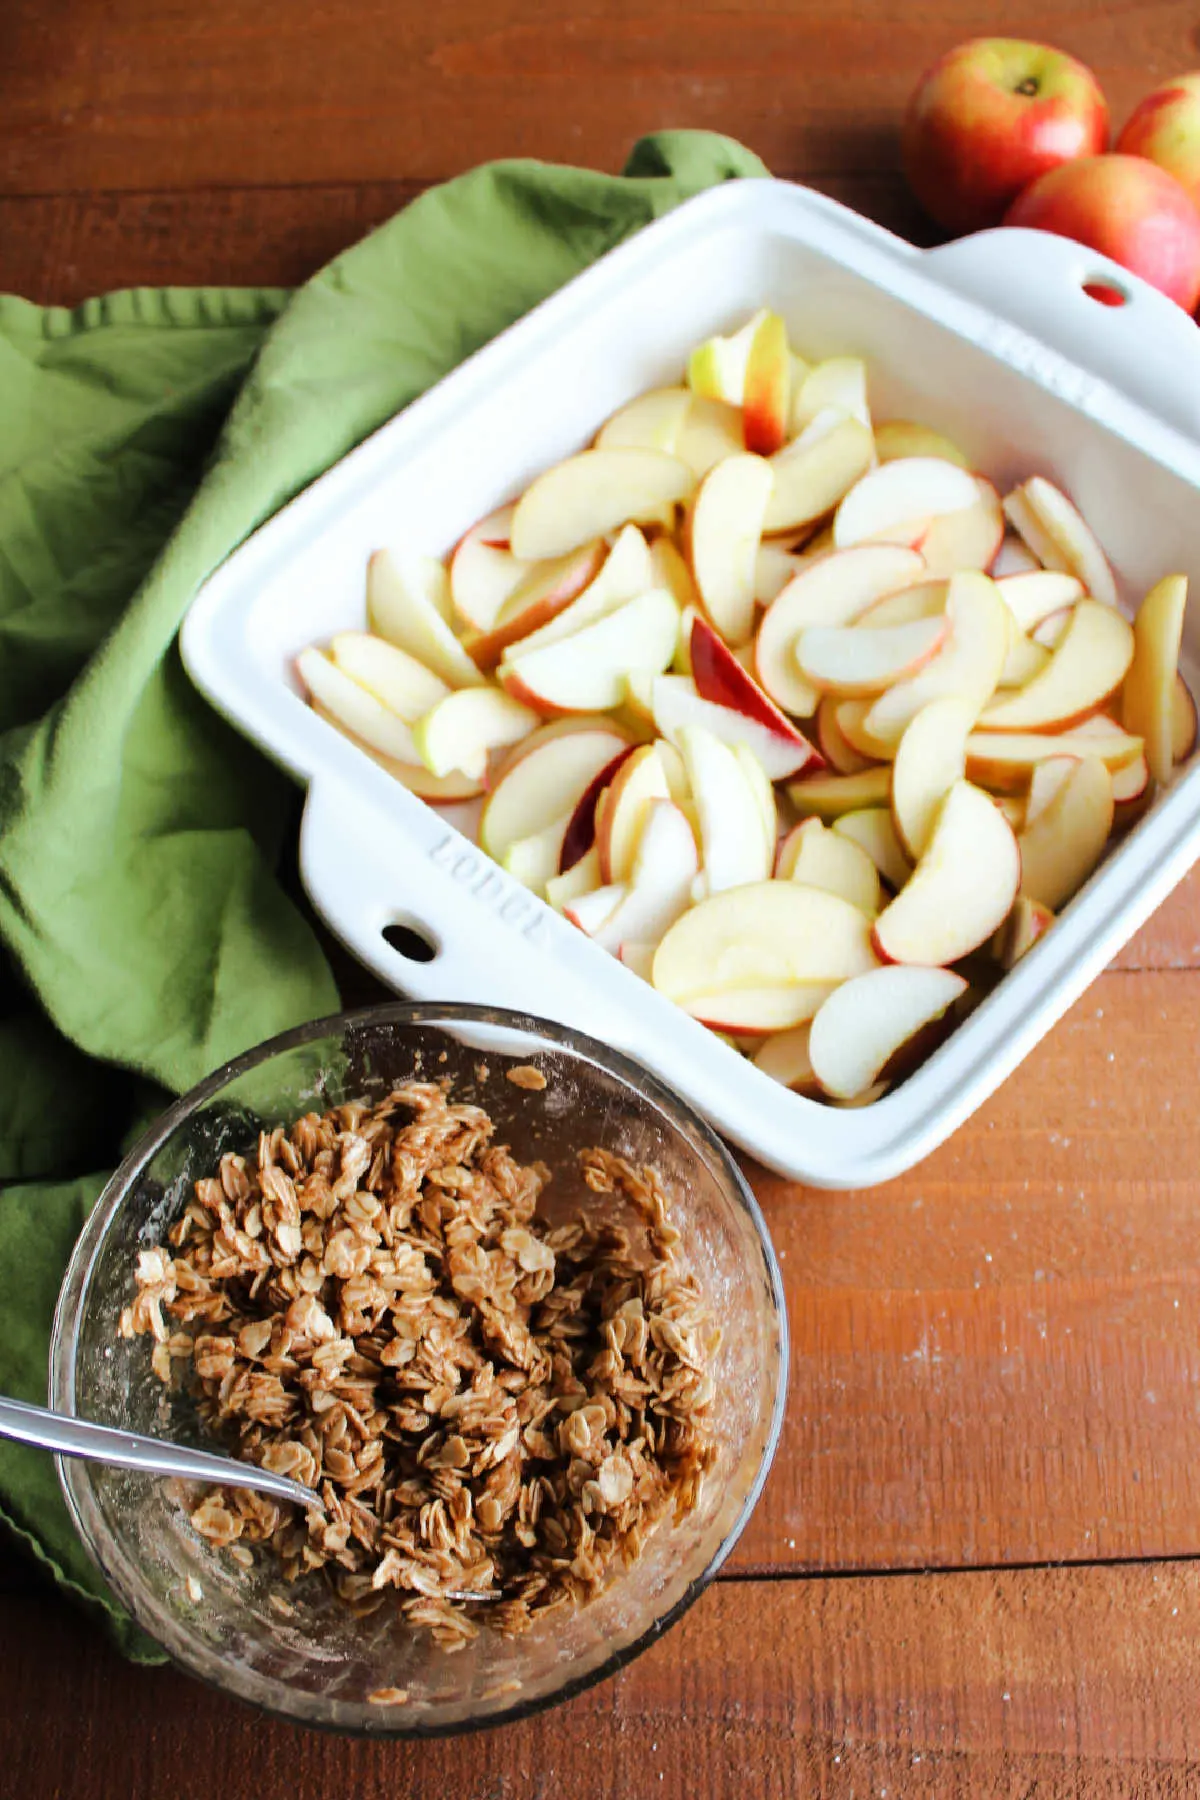 Sliced apples in square baking dish with small bowl of oat topping nearby.